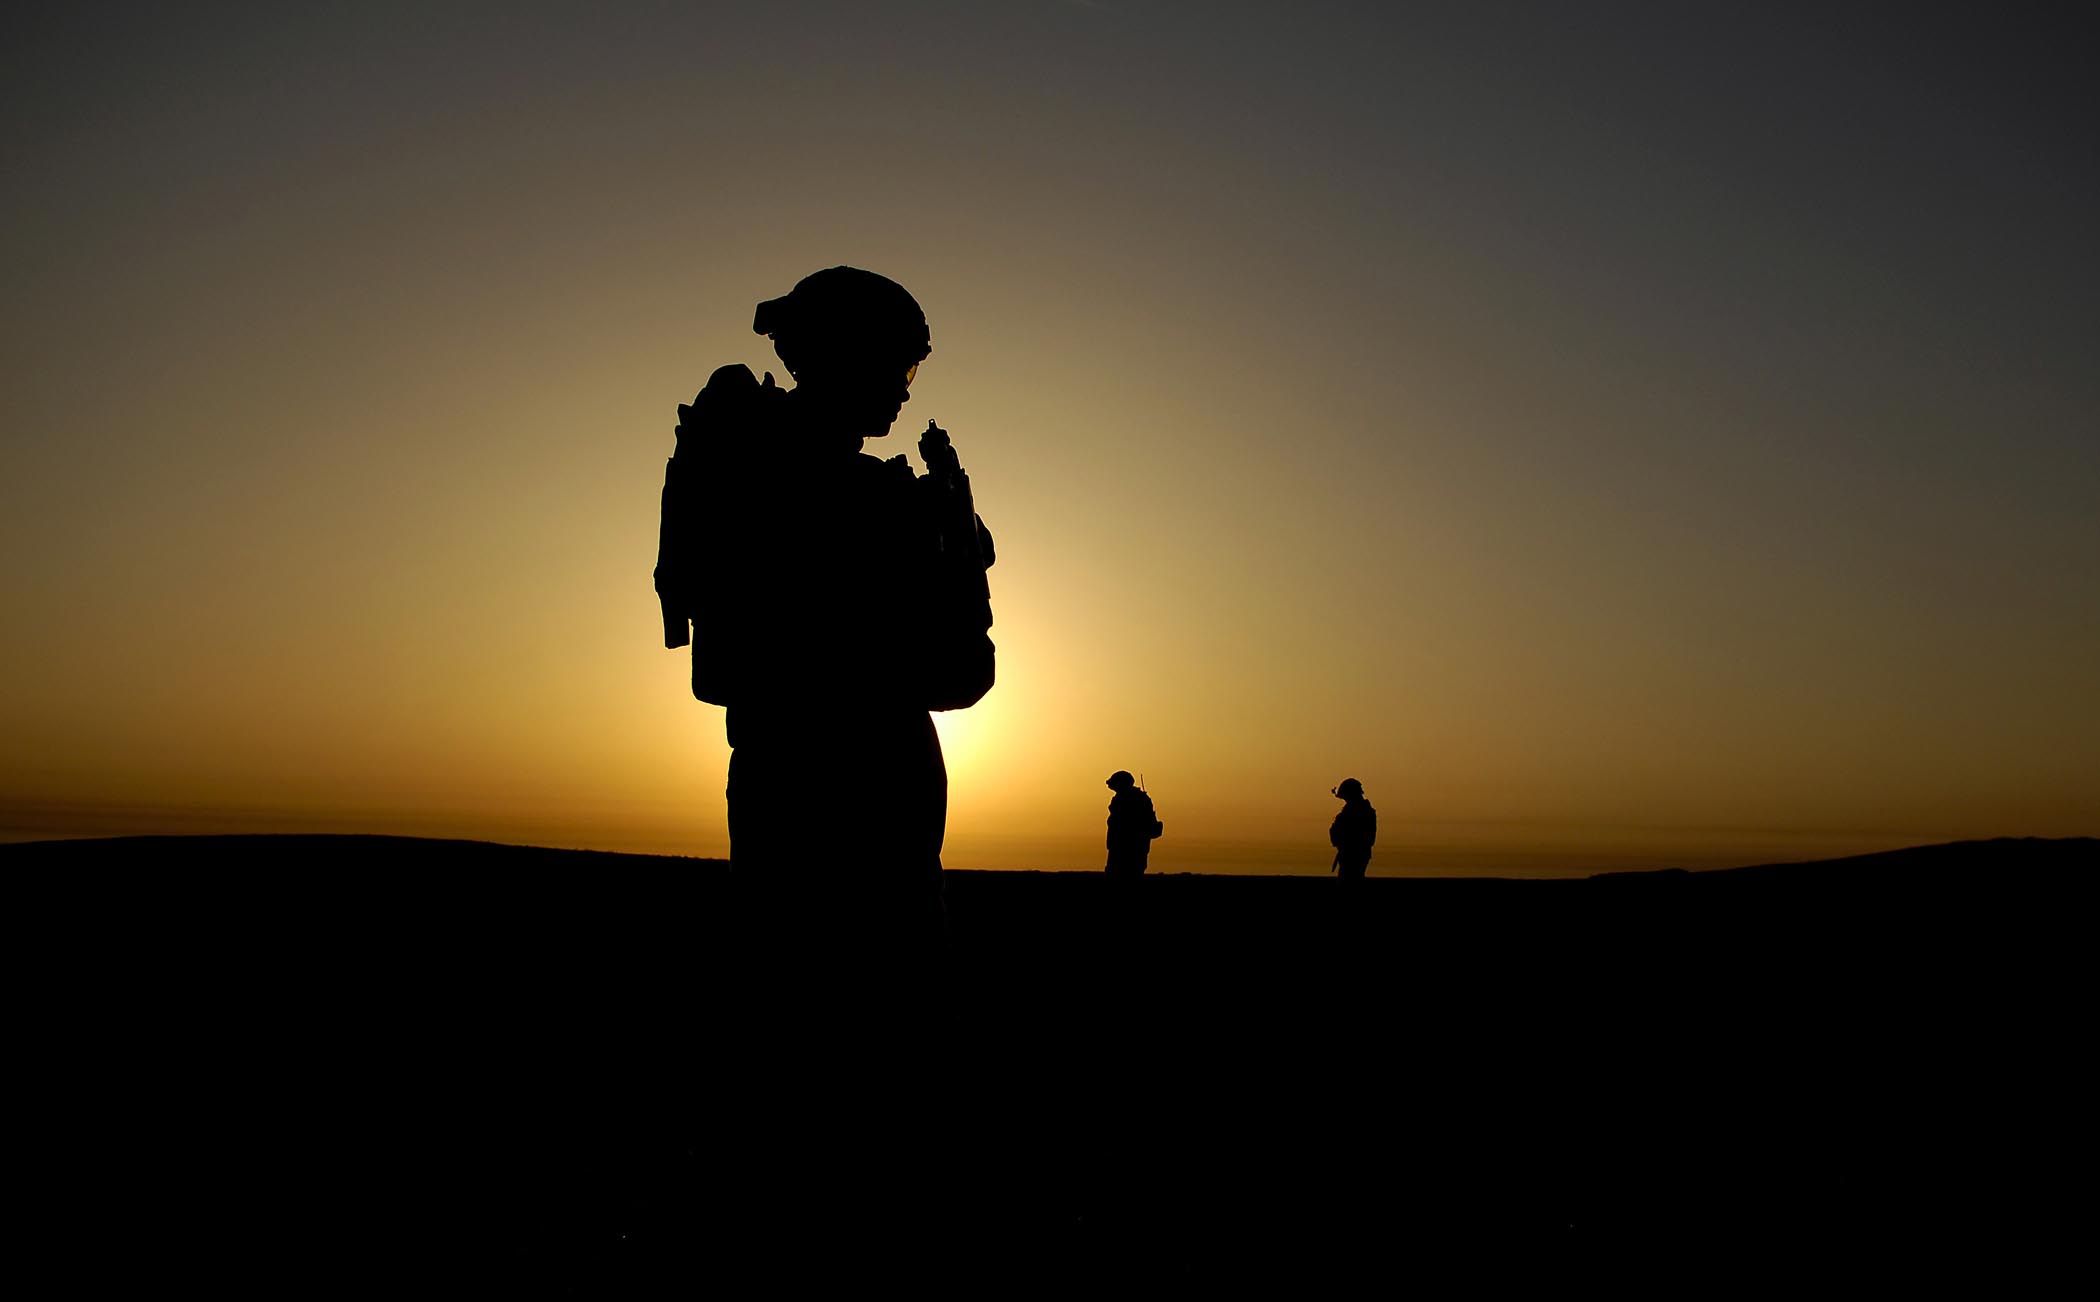 File:U.S. Army Soldier silhouette on mission in Iraq 